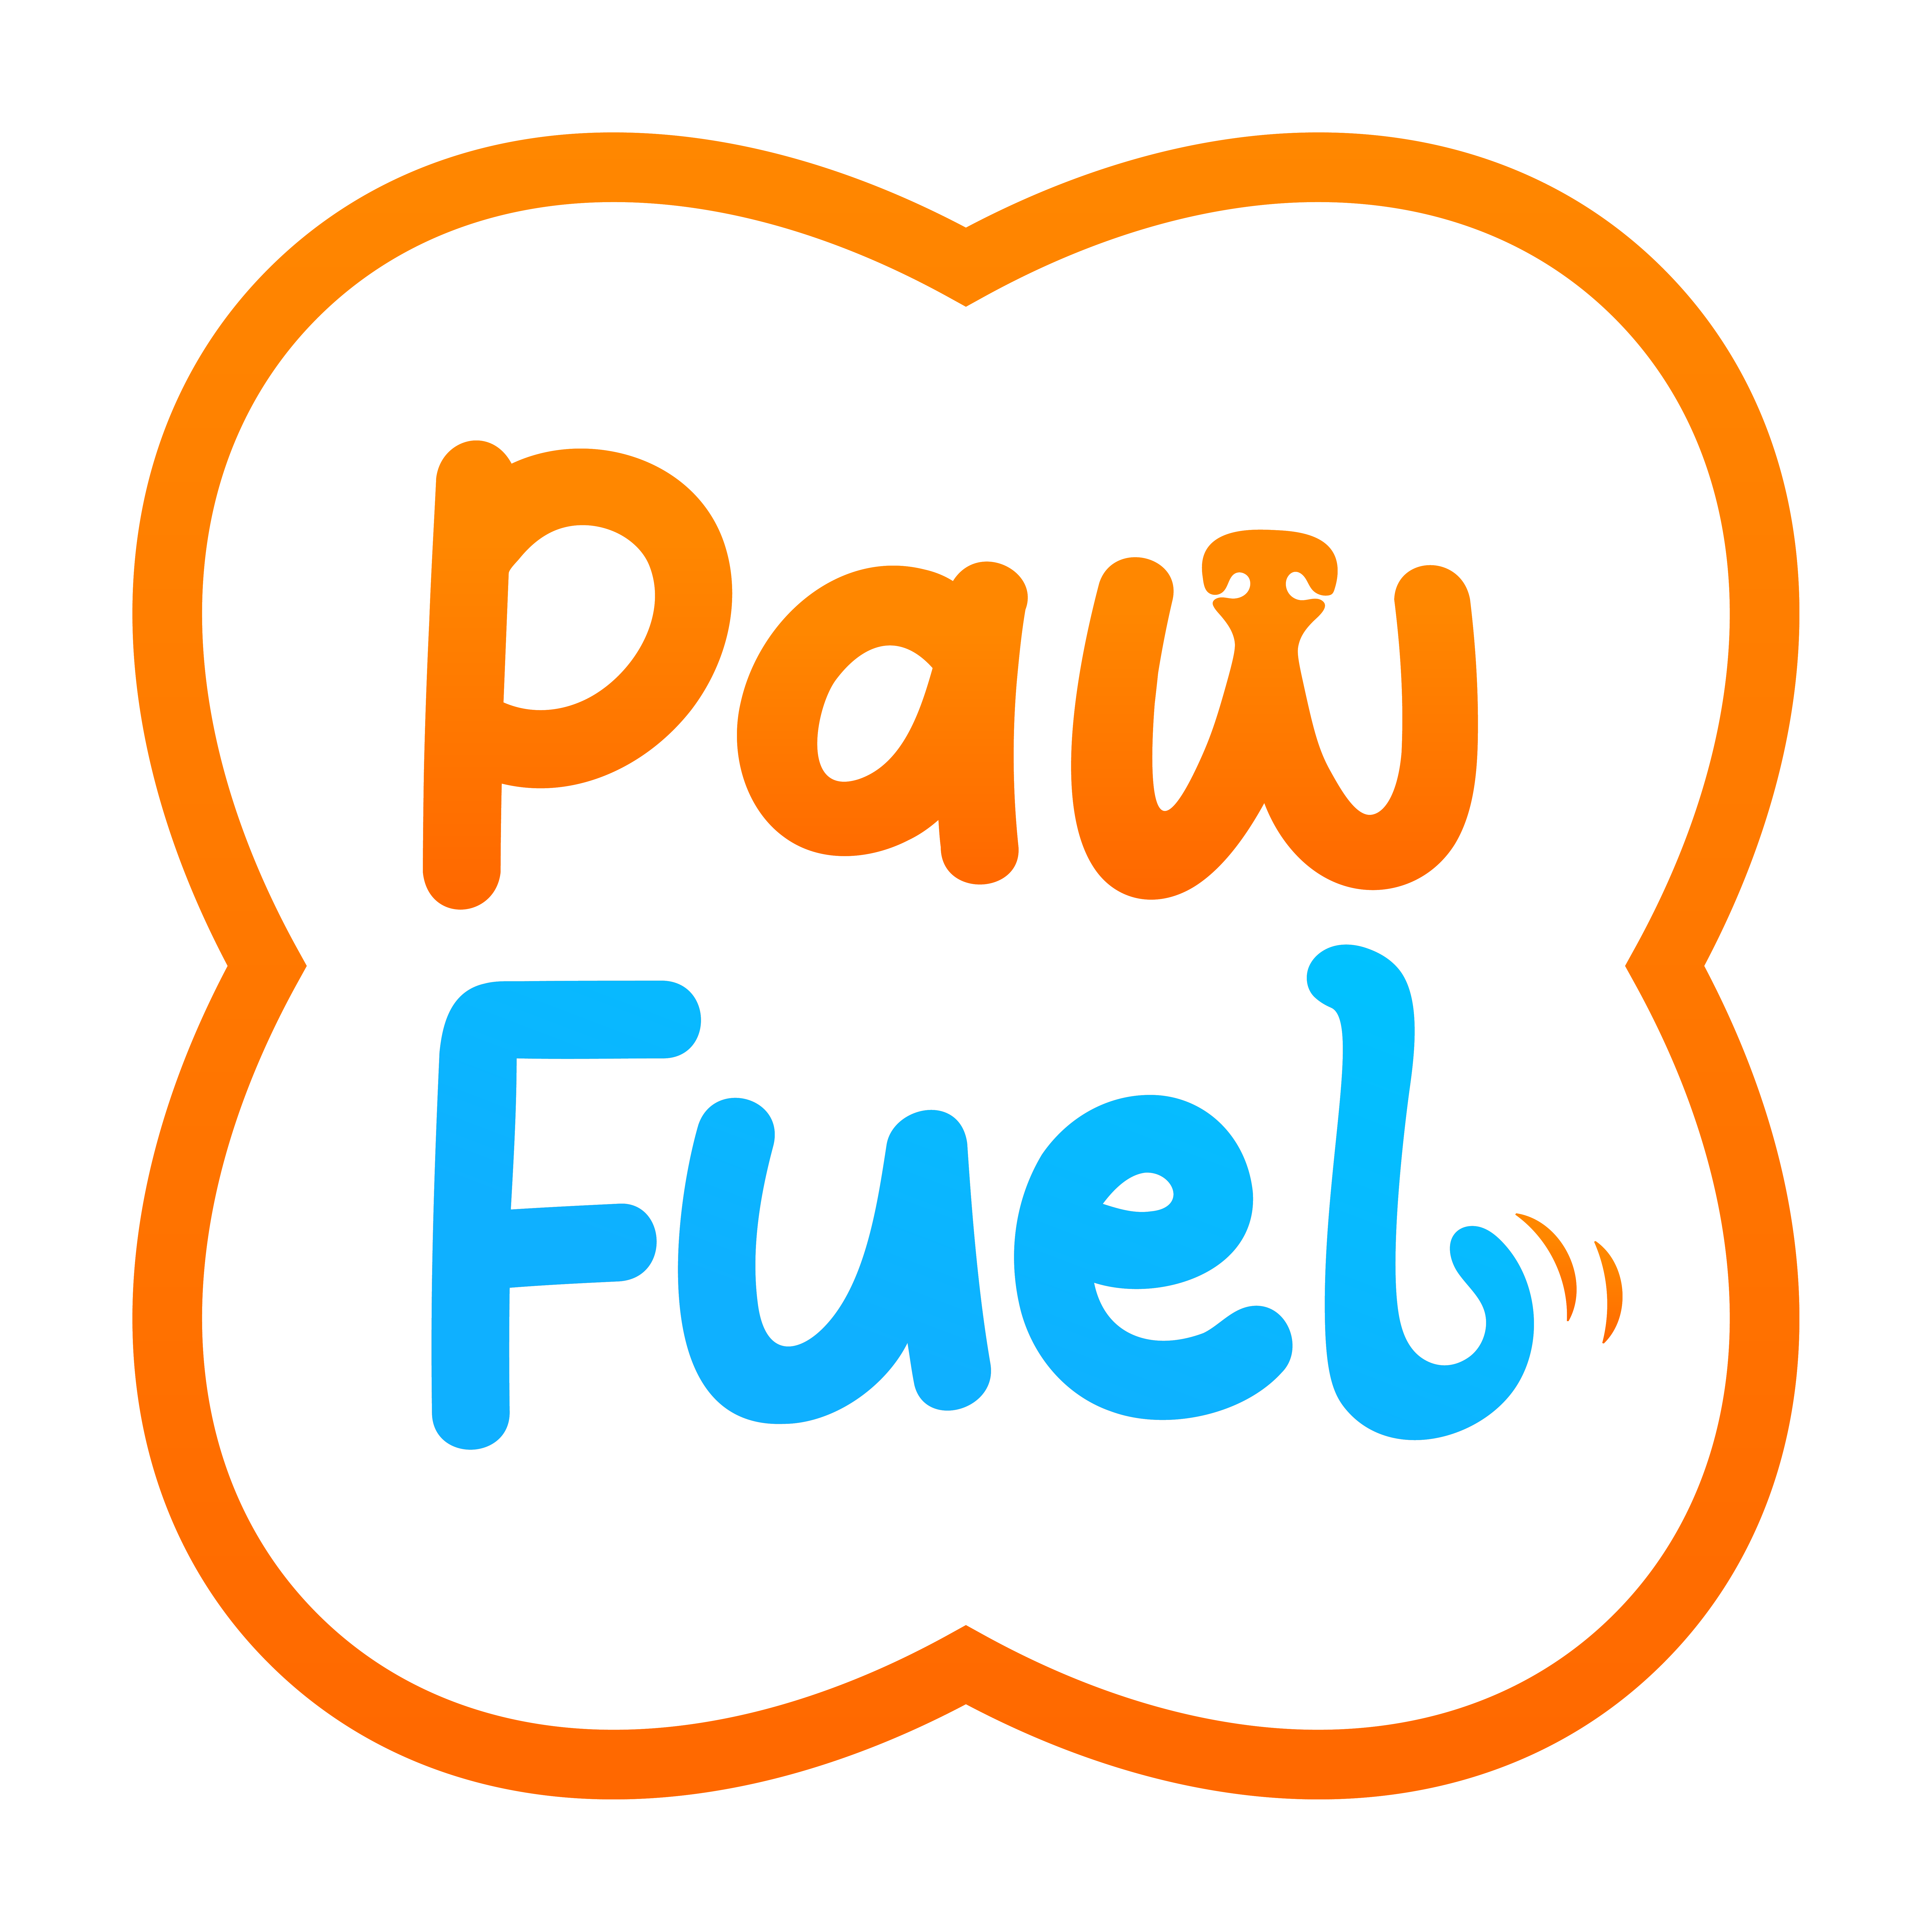 Pawfuel founded by Herbert Pritzki. Pawfuel’s concept consists of transforming food waste into affordable high-quality dog kibbles using bioconversion using Black Soldiers Fly. It can provide affordable products that contain rare and crucial nutrients for pets.